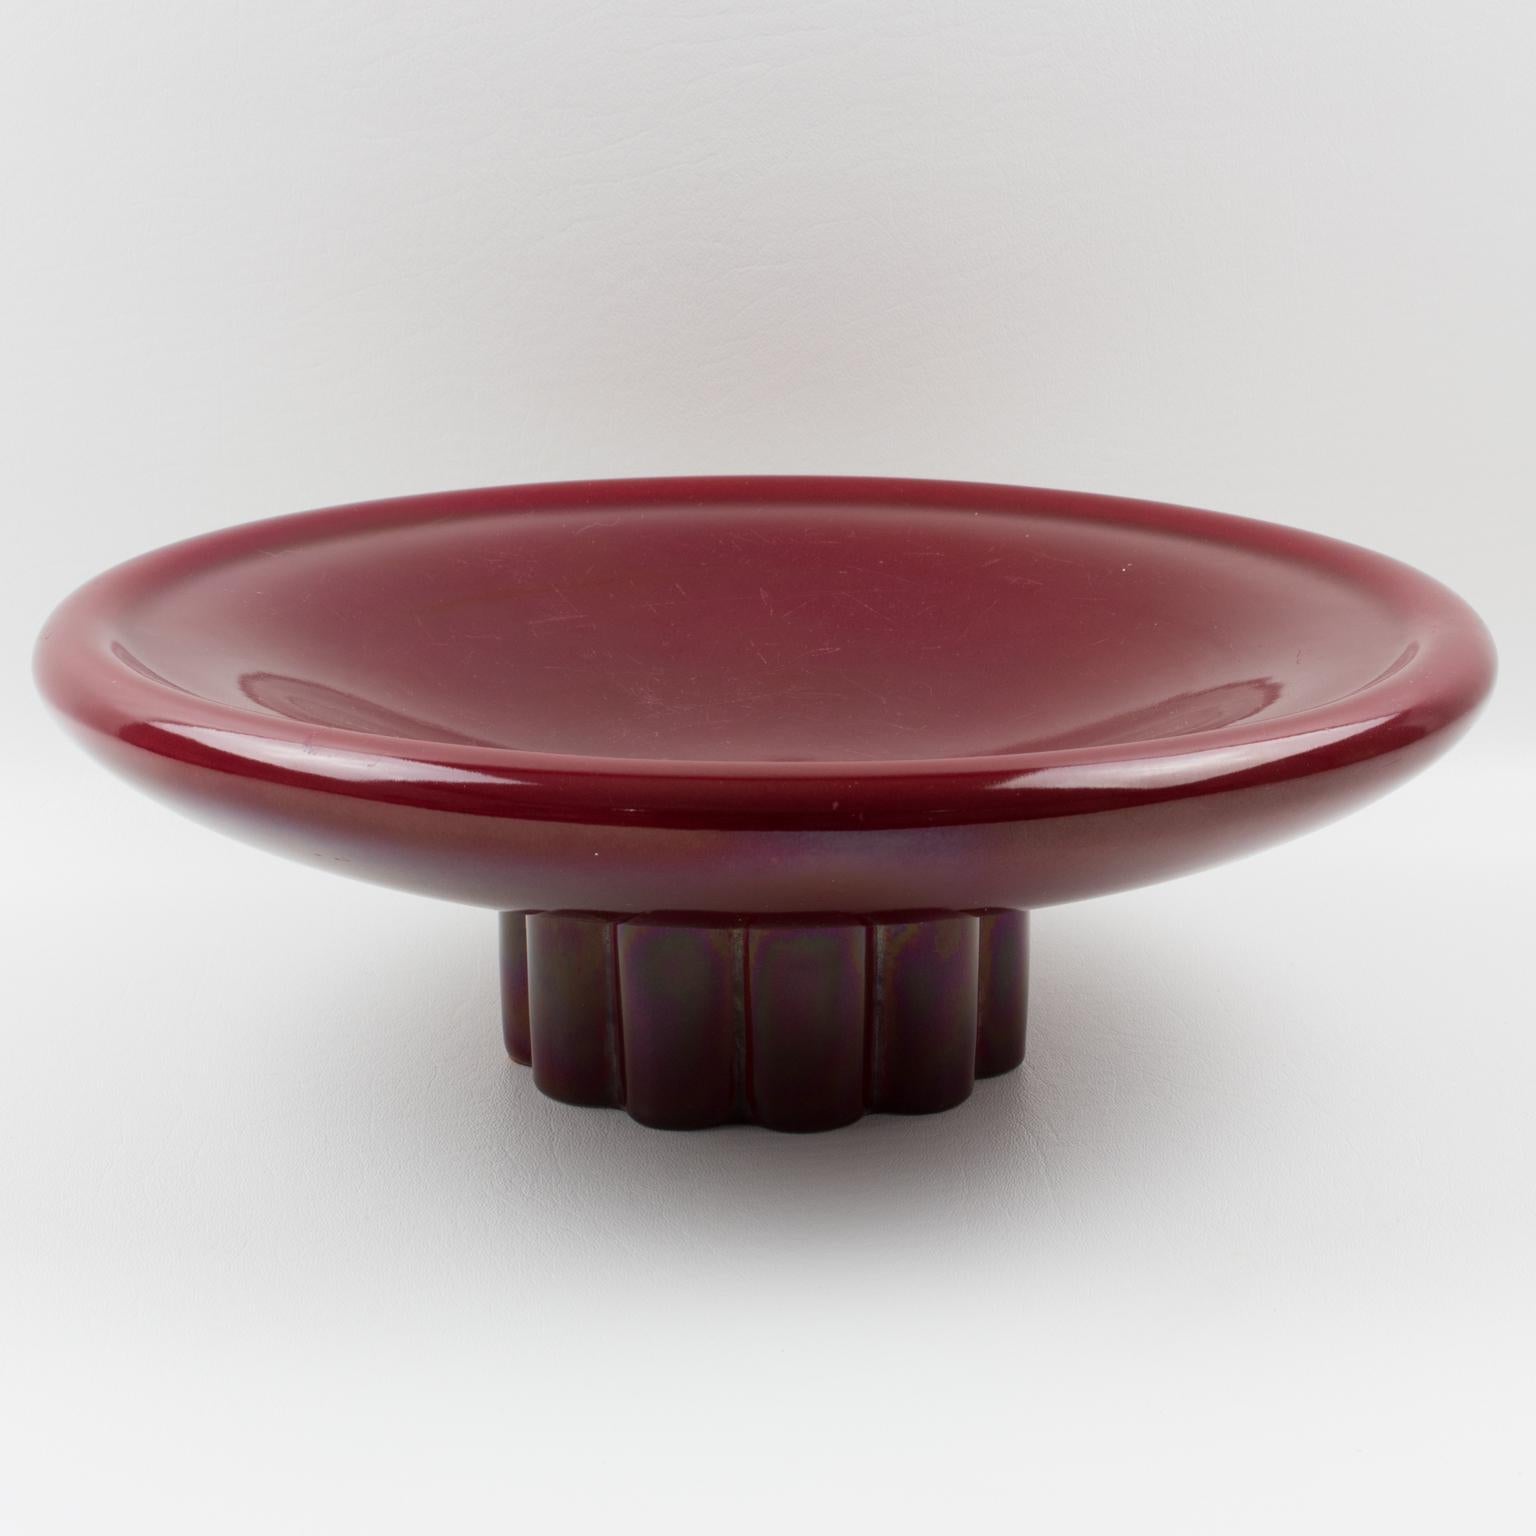 A charming French Art Deco modernist ceramic decorative bowl centerpiece, designed by Paul Milet (1870-1950) for Manufacture de Sevres, France. Large streamline round shape with oxblood red glaze on fluted base. Signed and marked underside: 